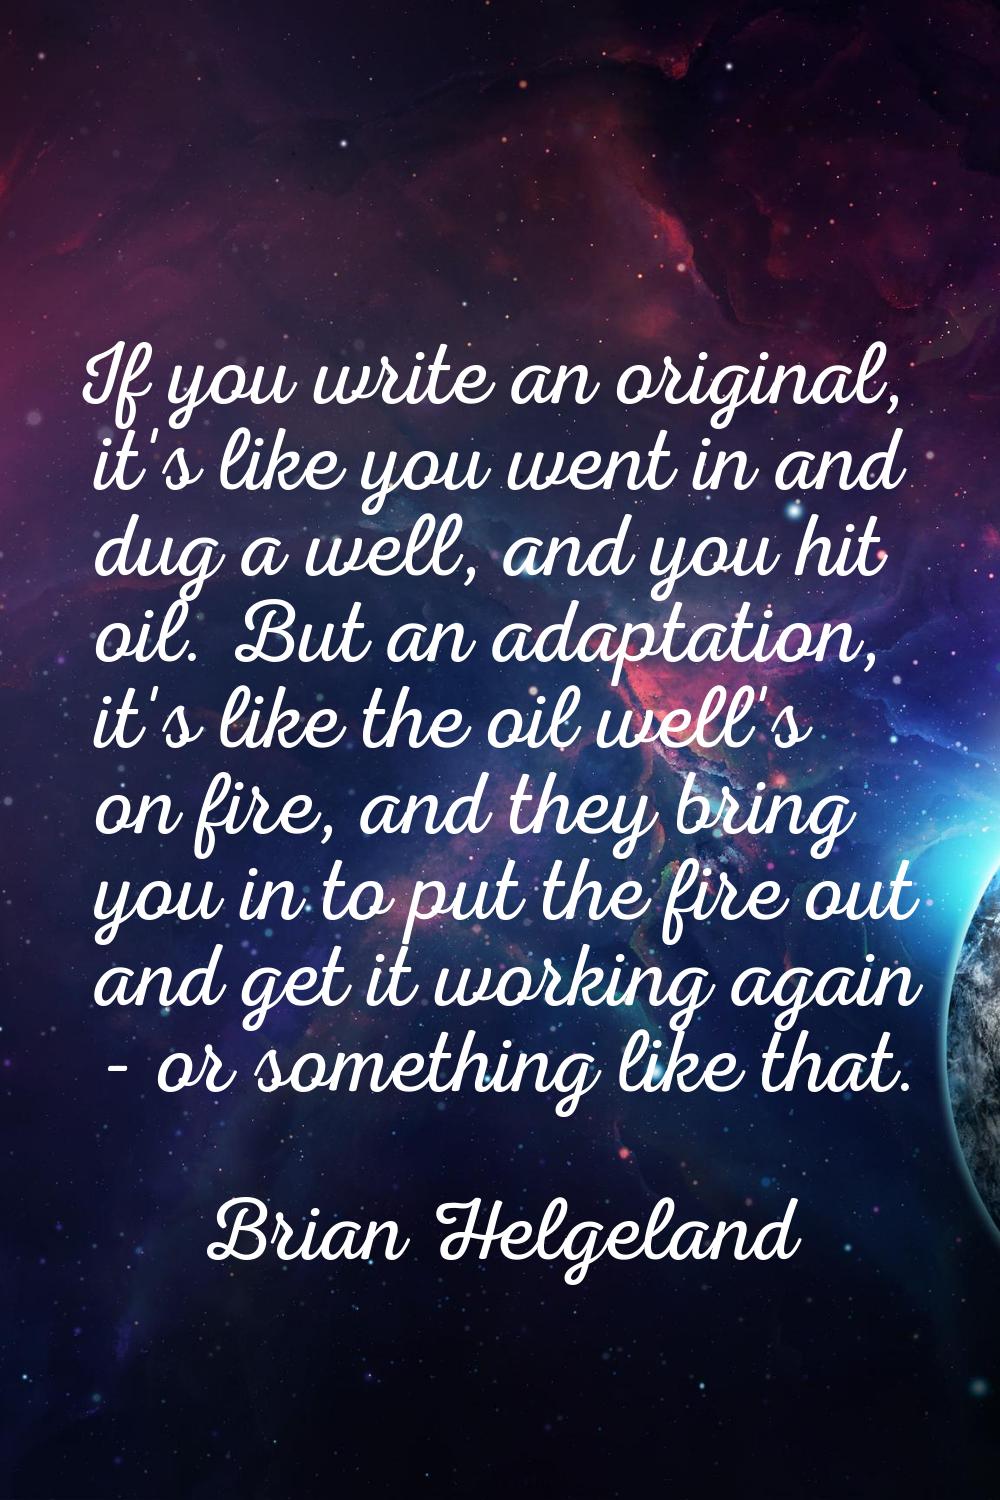 If you write an original, it's like you went in and dug a well, and you hit oil. But an adaptation,